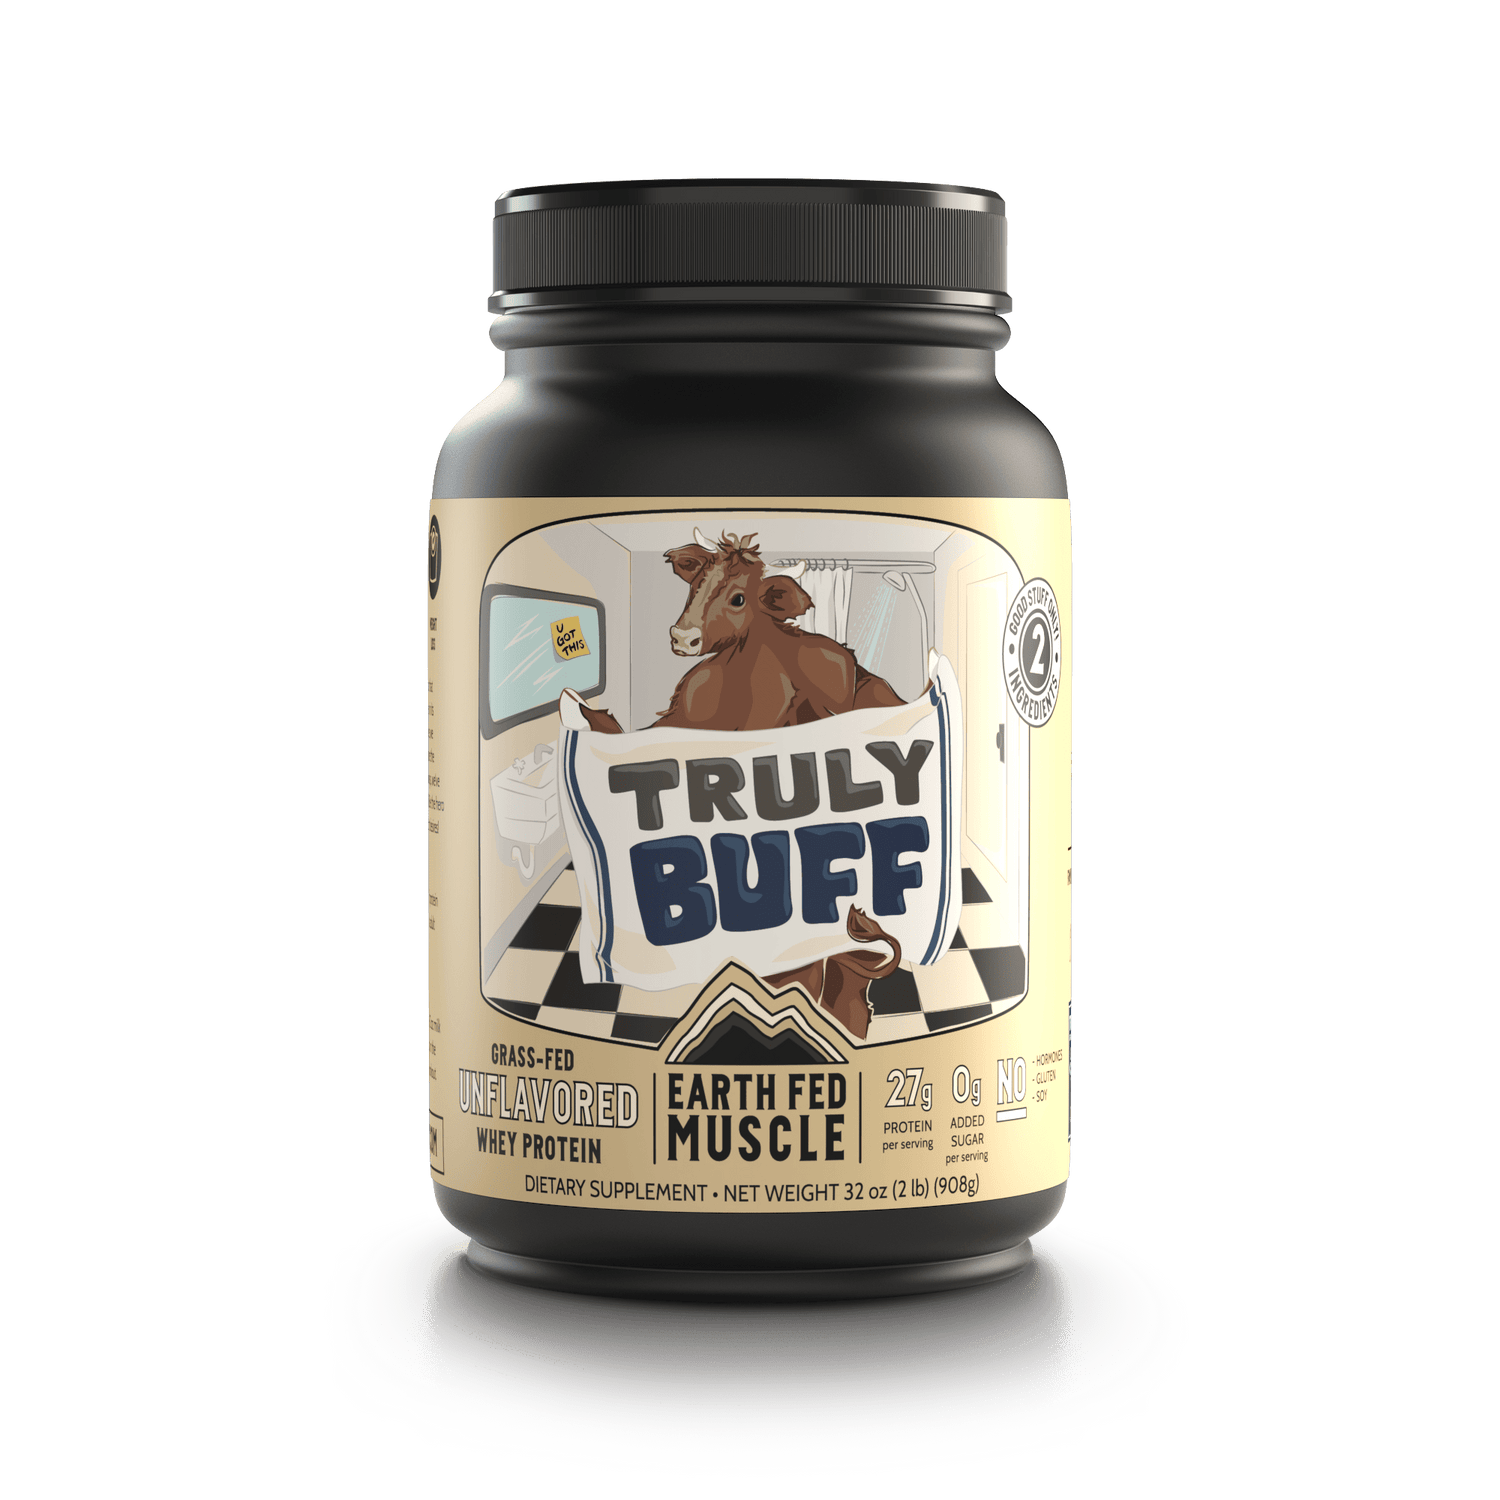 Truly Buff Unflavored Grass Fed Whey Protein Powder by Earth Fed Muscle